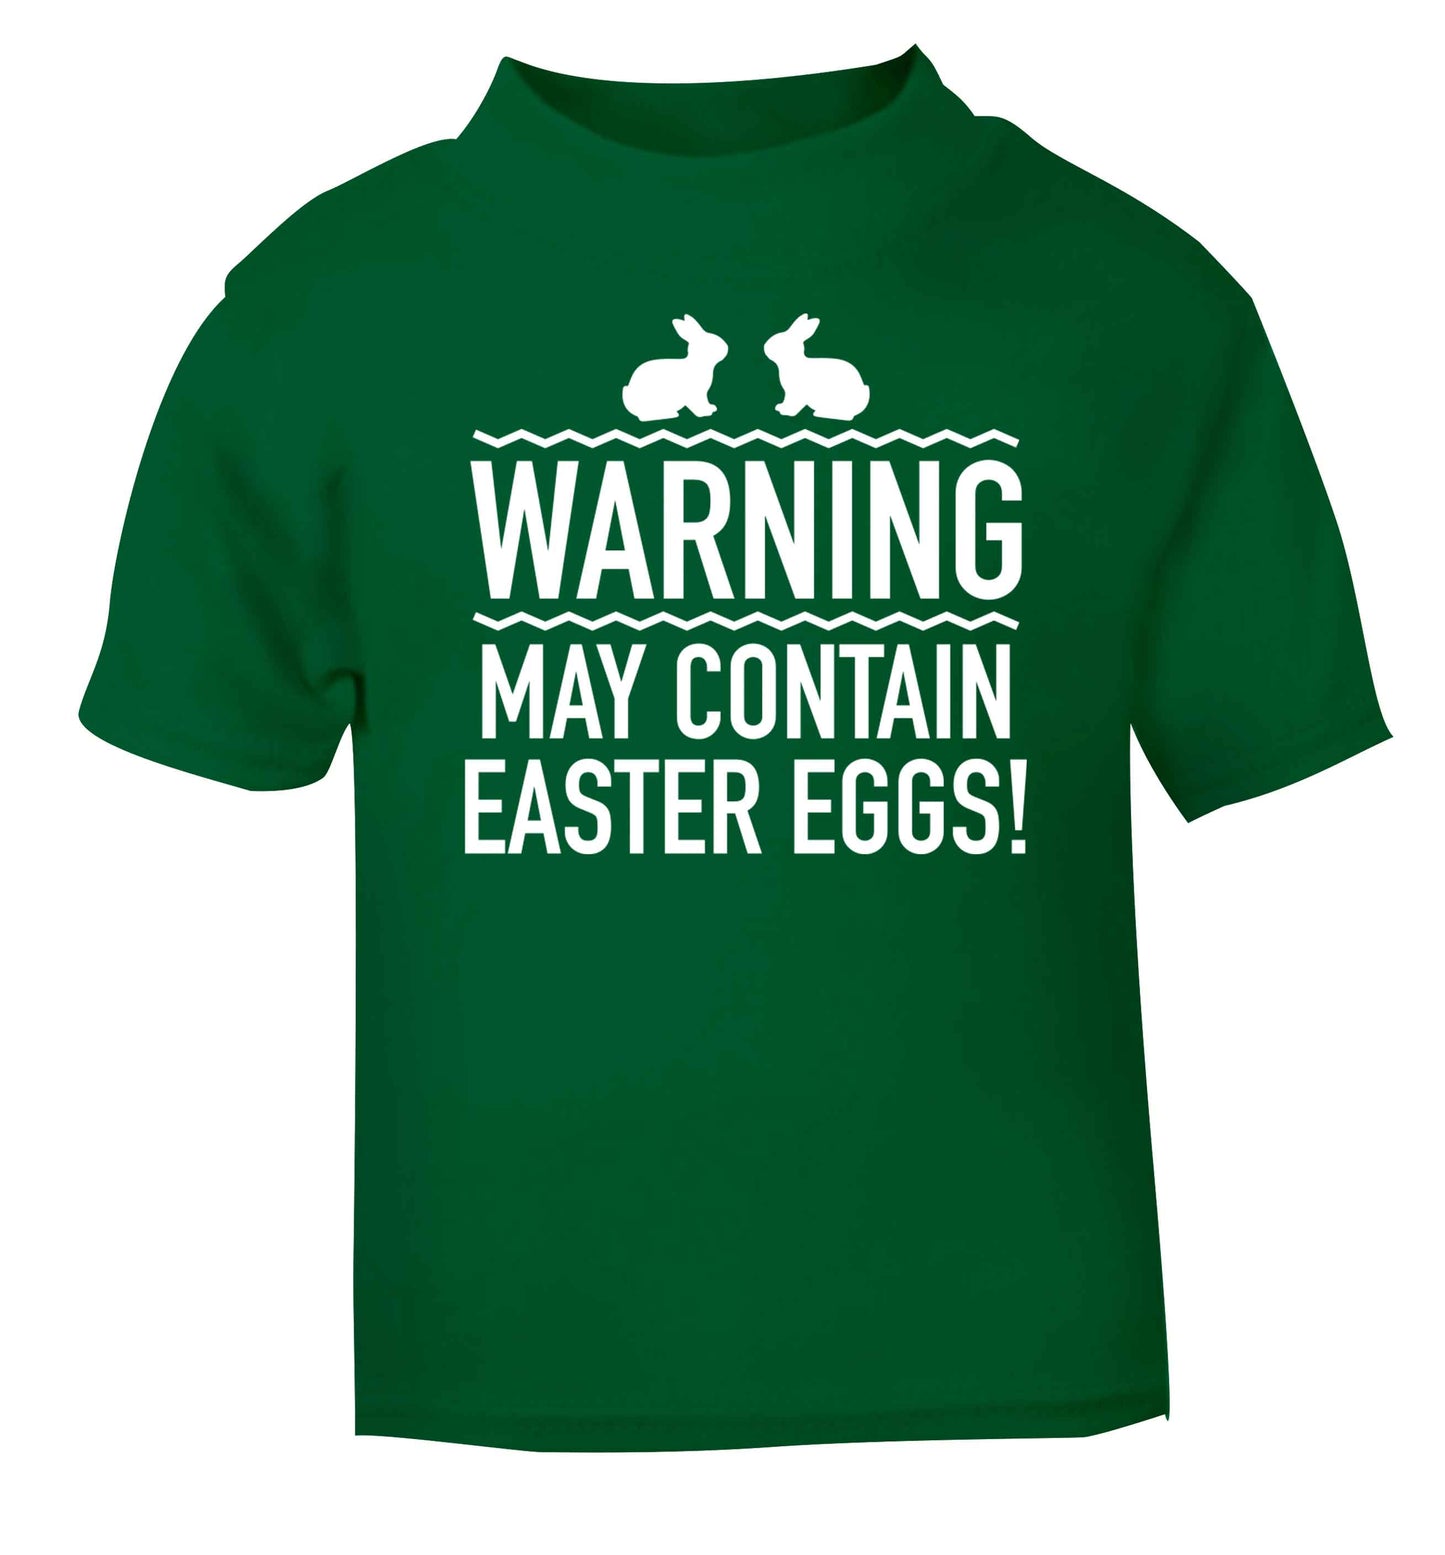 Warning may contain Easter eggs green baby toddler Tshirt 2 Years